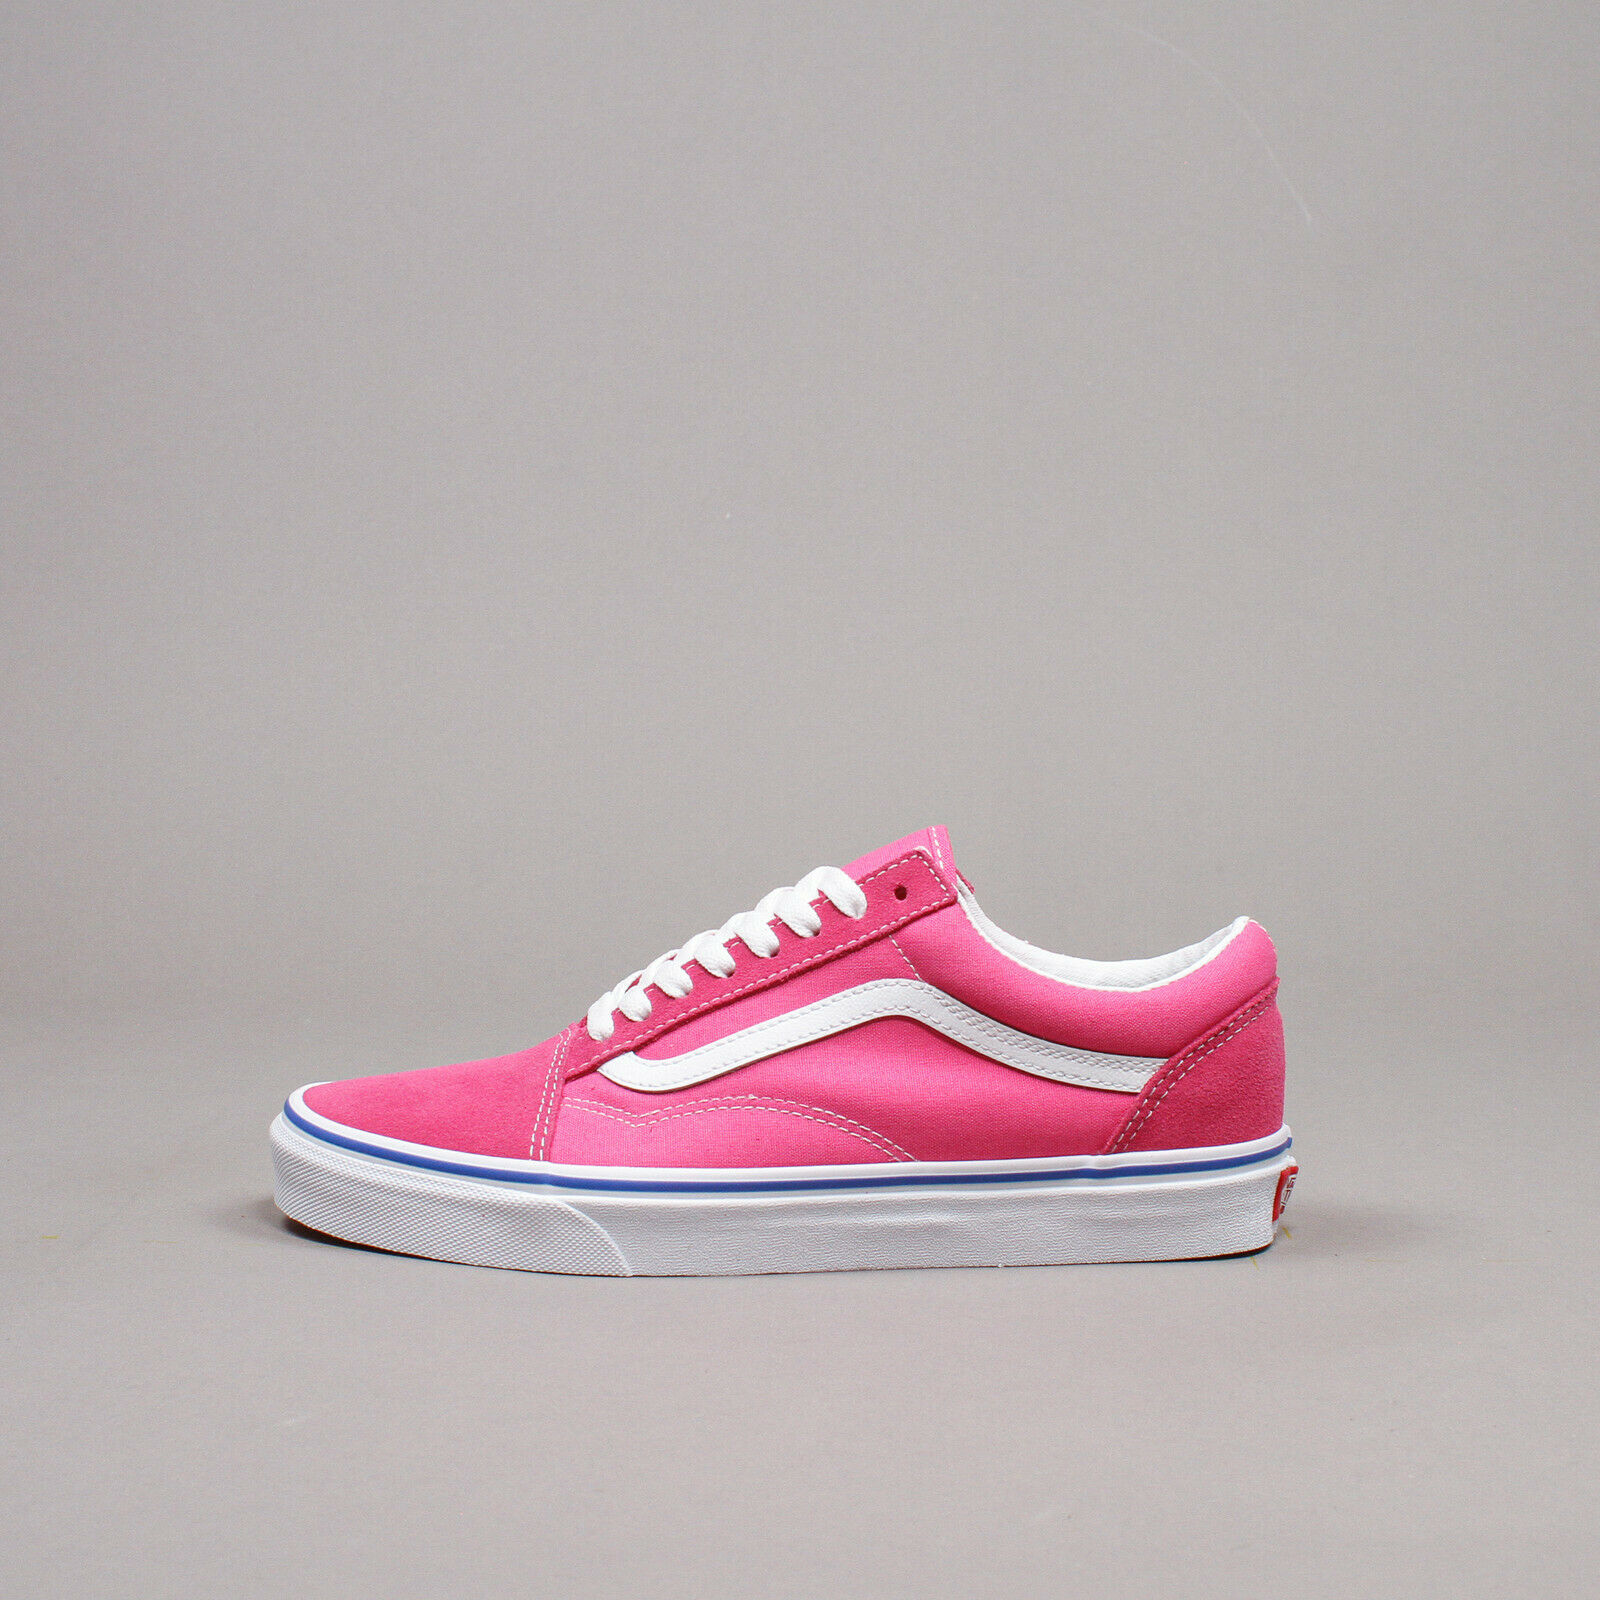 vans blue and grey or pink and white